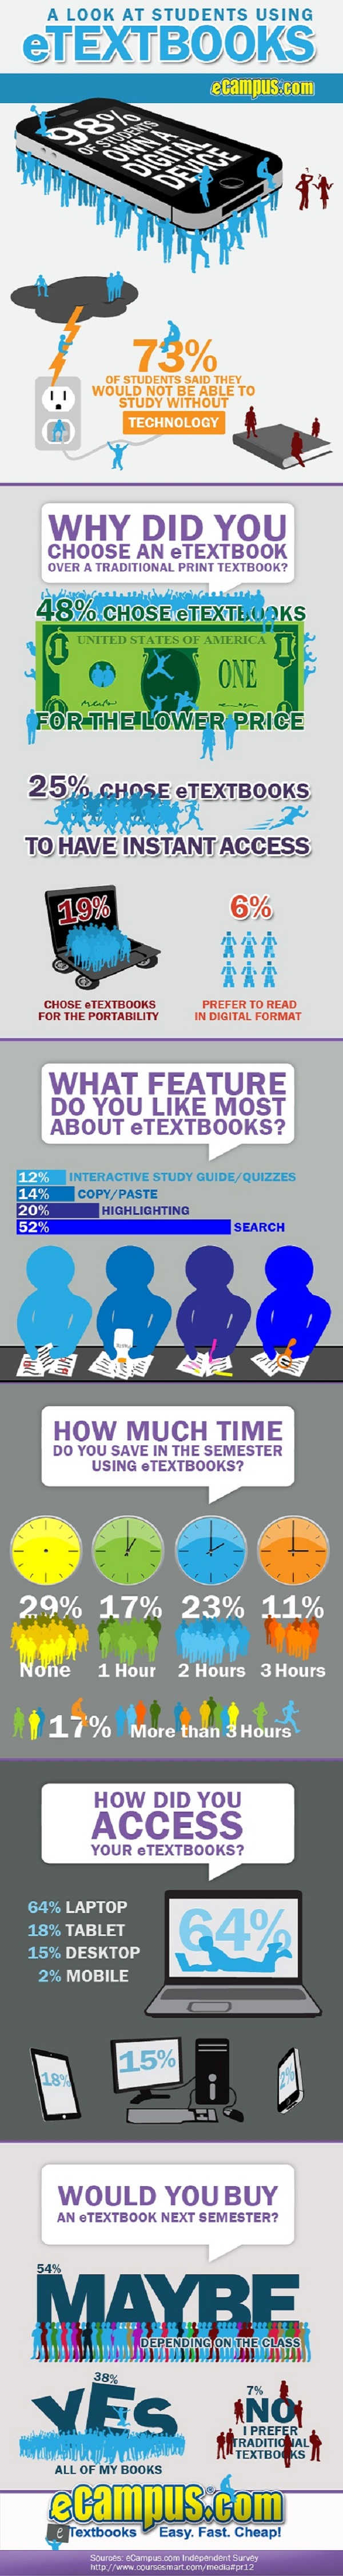 More Students Are Using eTextbooks Than Ever Before